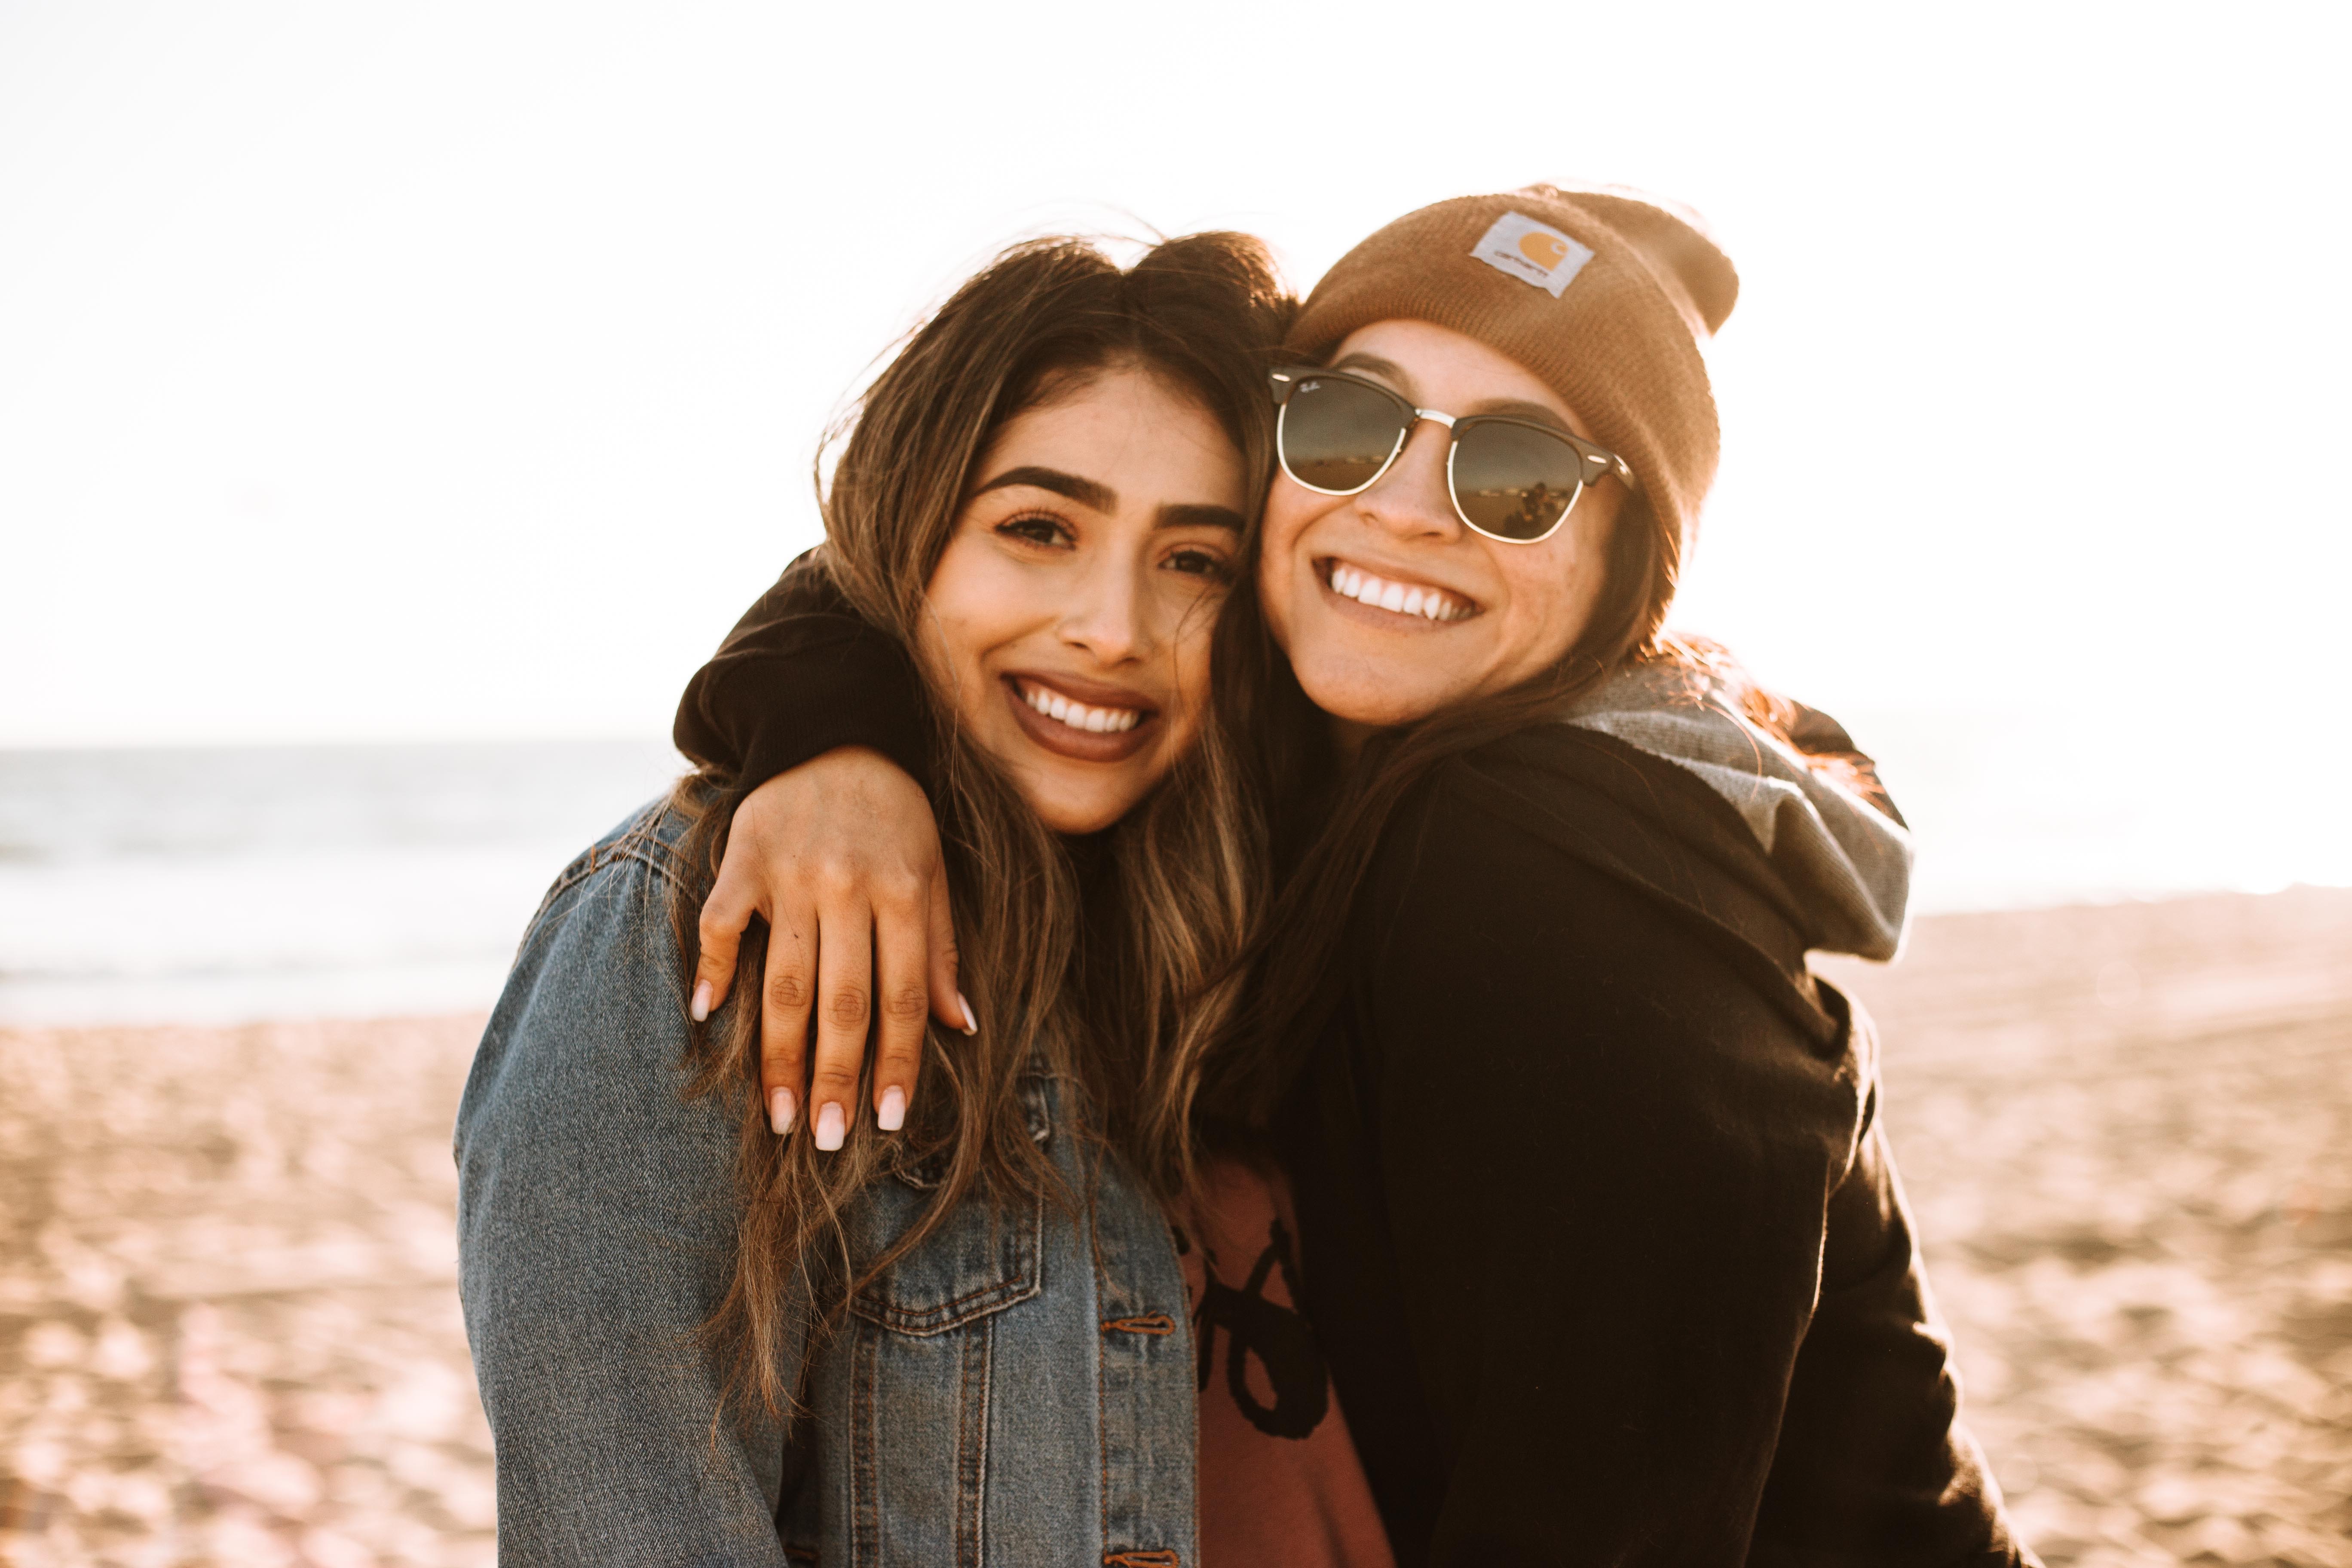 Two women smiling at the beach with their arms around each other.